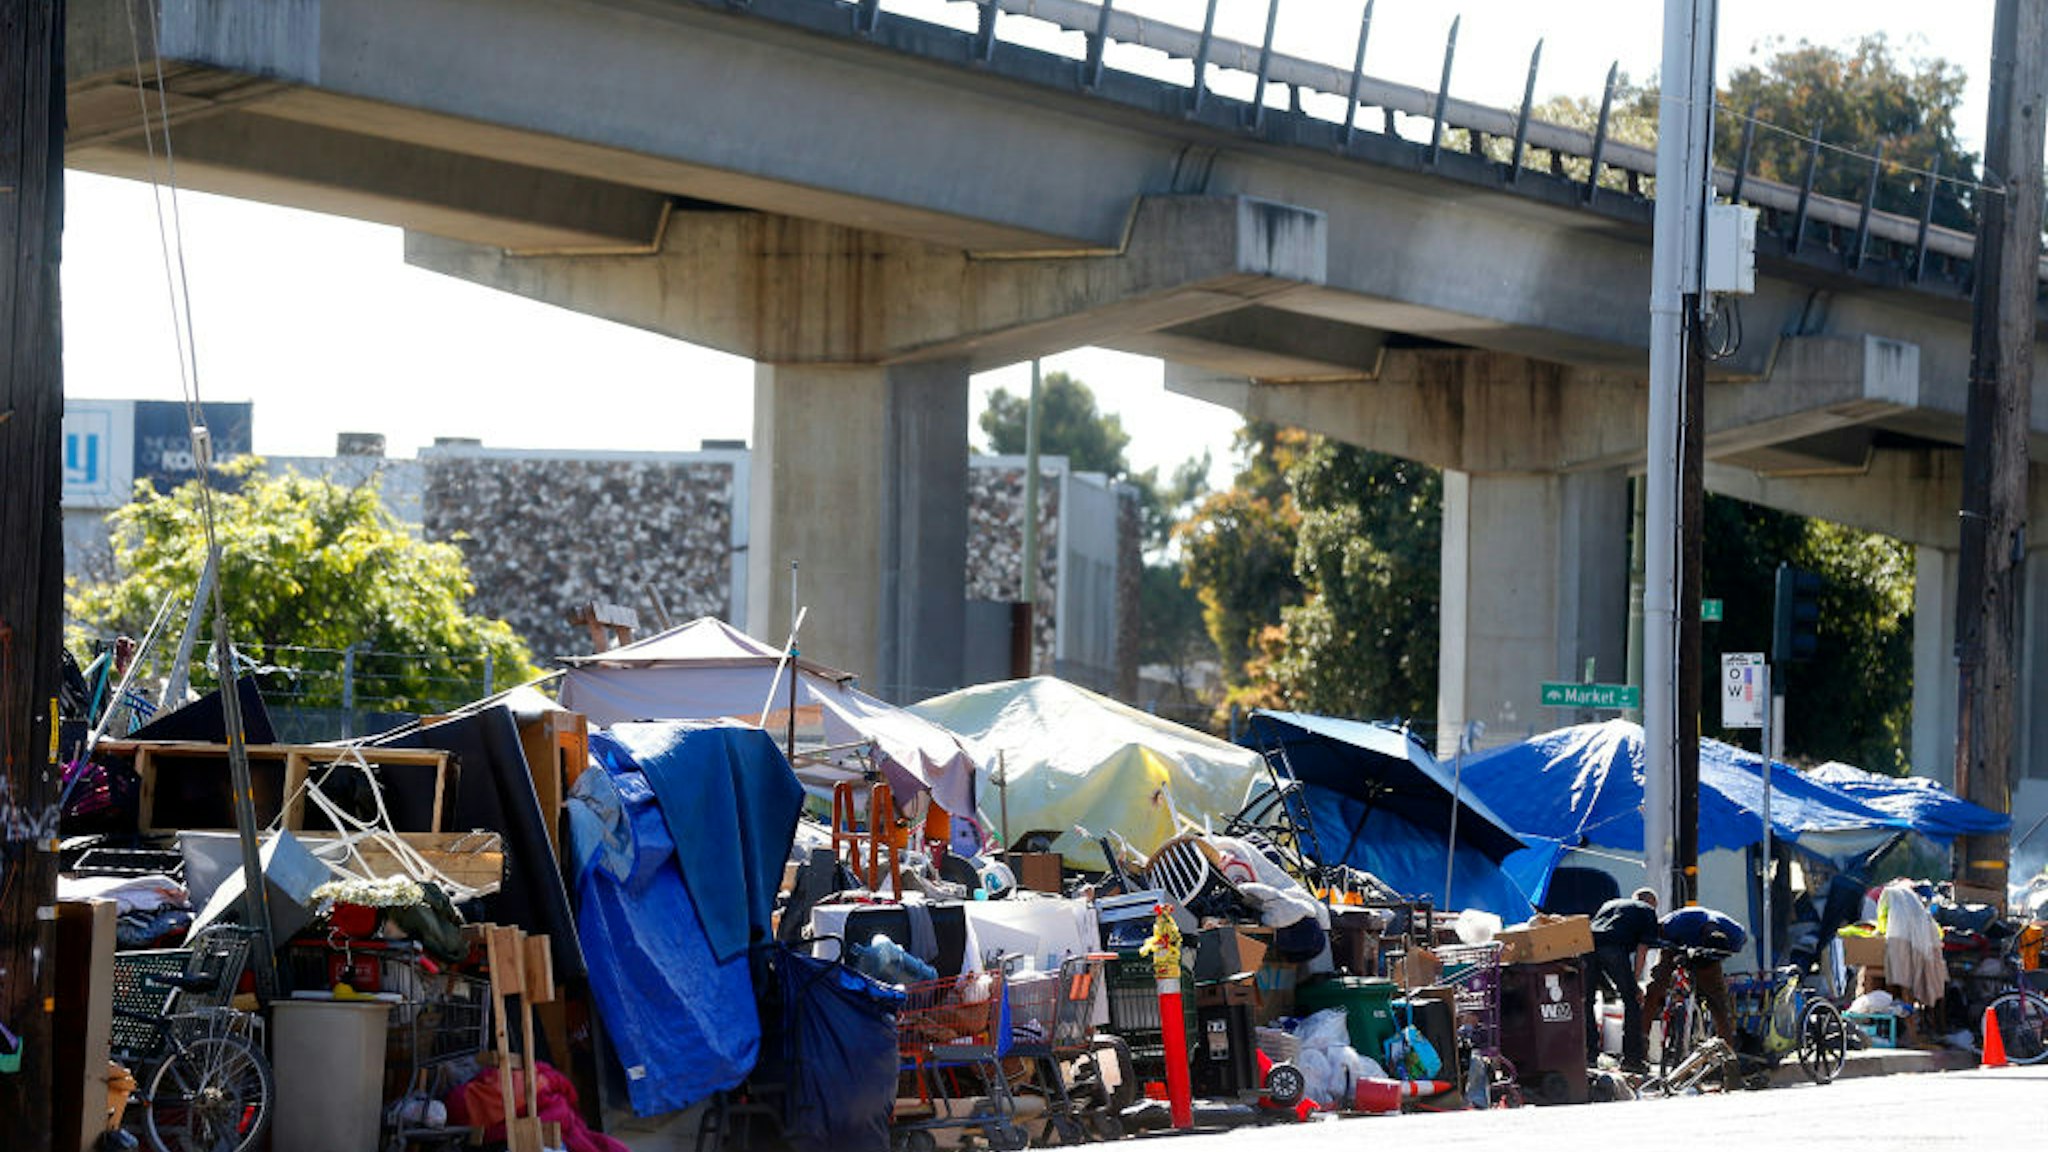 A homeless camp at Market Street and 5th Street is photographed on Thursday, May 18, 2017, in Oakland, Calif. (Aric Crabb/Bay Area News Group) (camp 20) (Photo by MediaNews Group/Bay Area News via Getty Images)